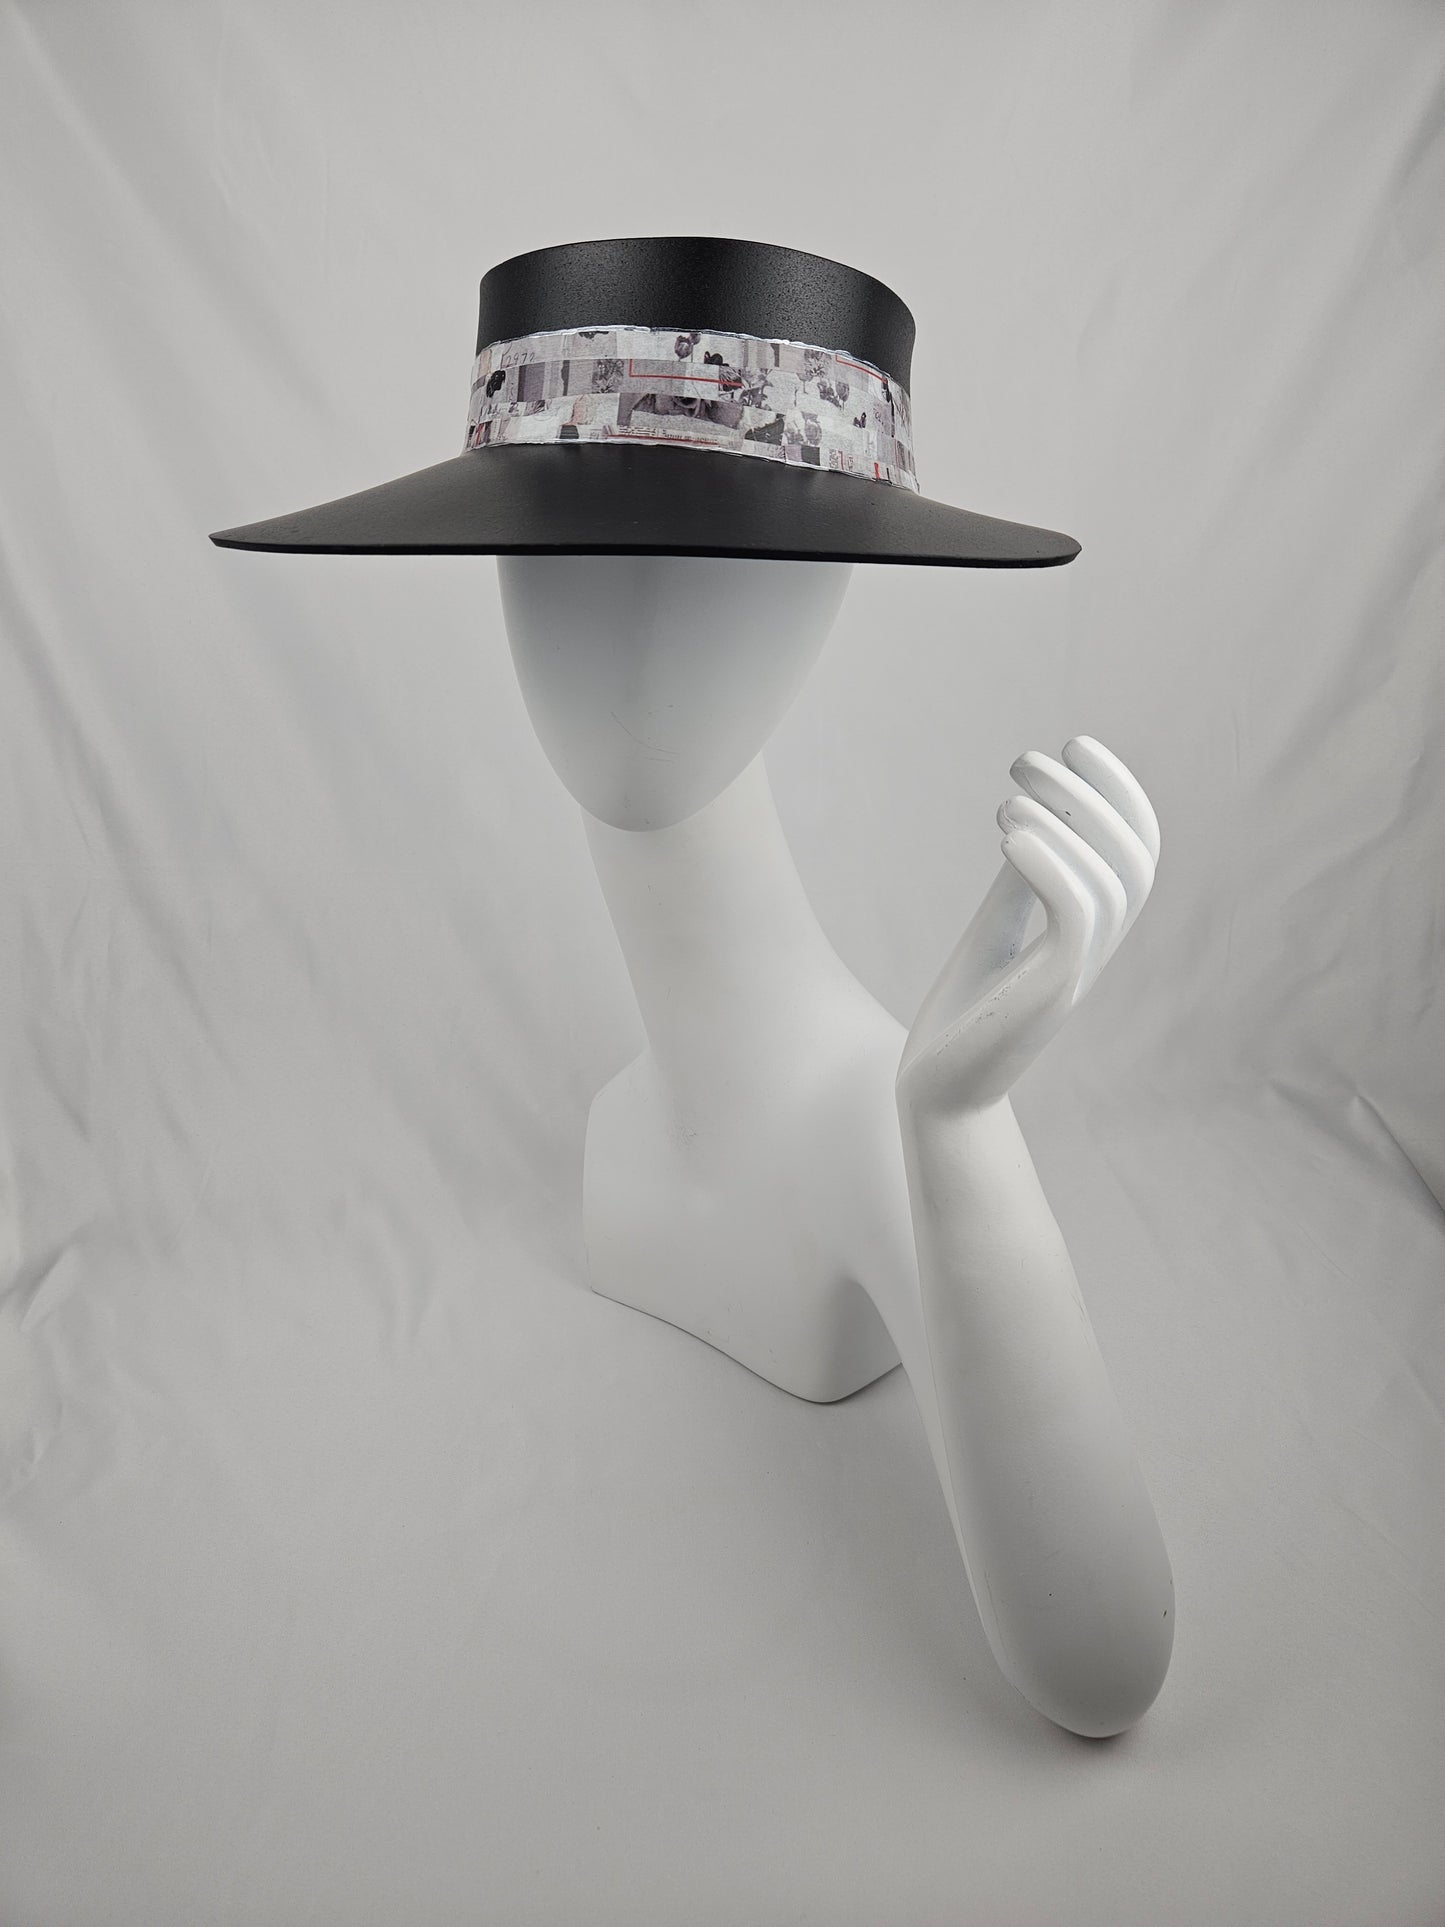 Timeless Black Audrey Foam Sun Visor Hat with Elegant Vintage Style Collage Band with Small Red Detail: 1950s, Walks, Brunch, Tea, Golf, Wedding, Church, No Headache, Easter, Pool